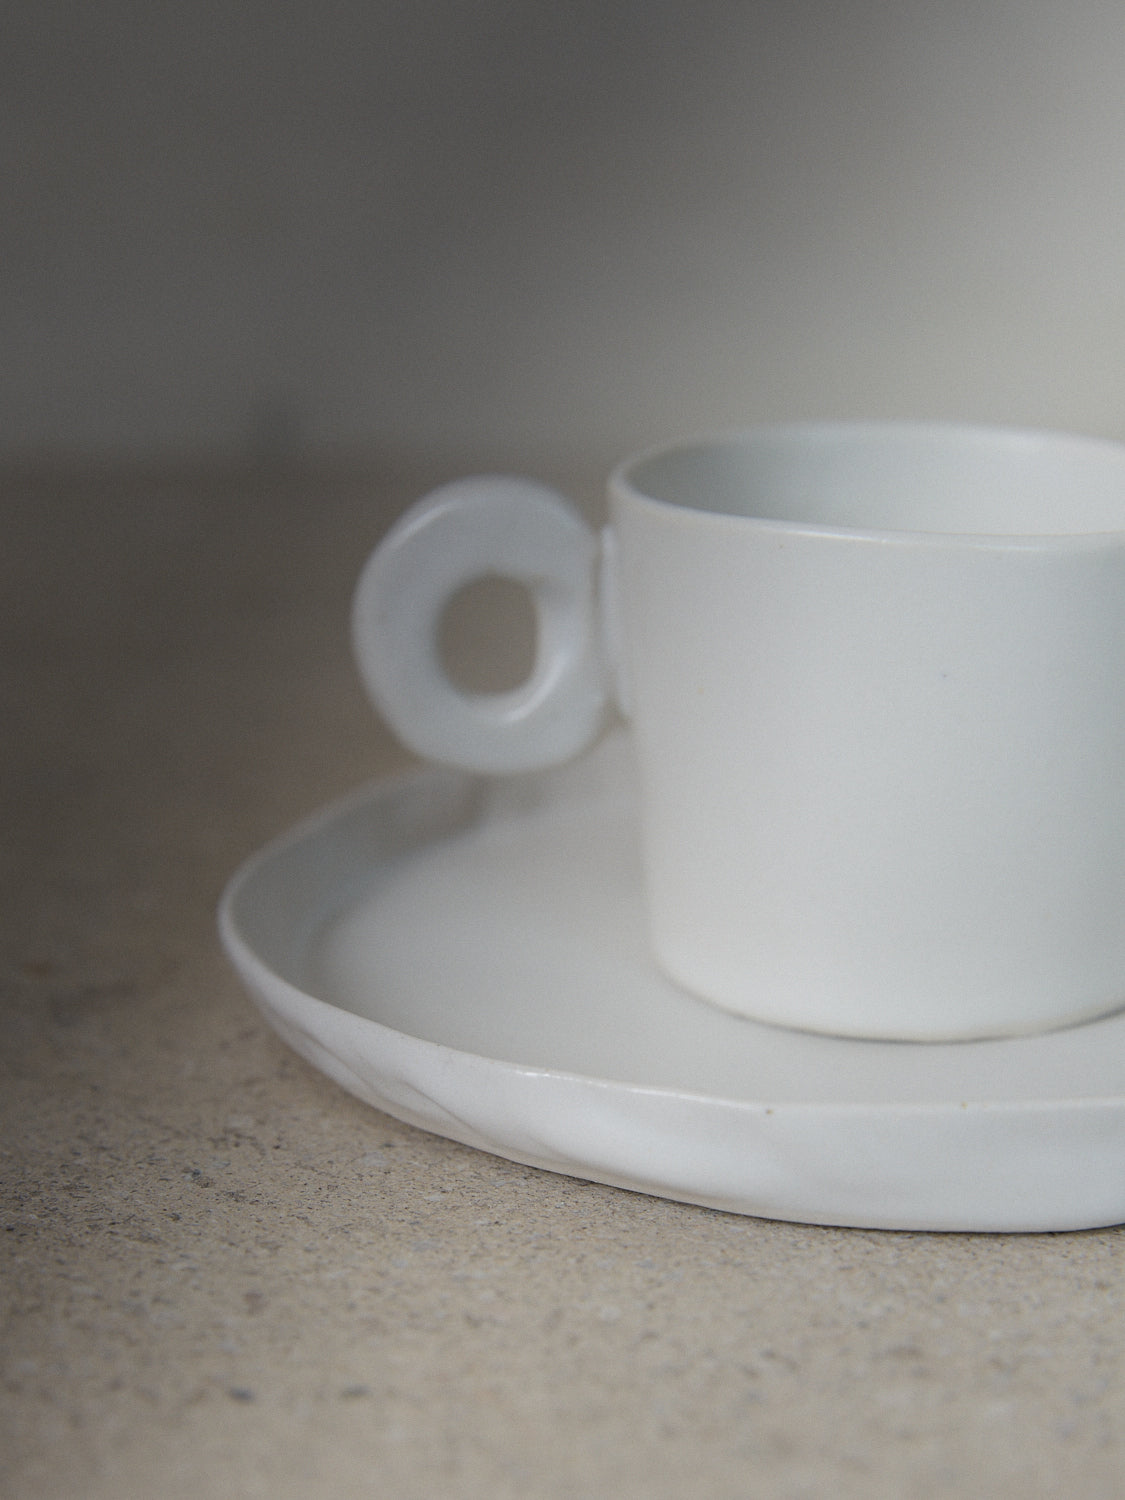 Raw Espresso Cup Set. Exclusively ours. A set of two playful, handmade espresso cups with round handles and matching saucers in matte white stoneware. 